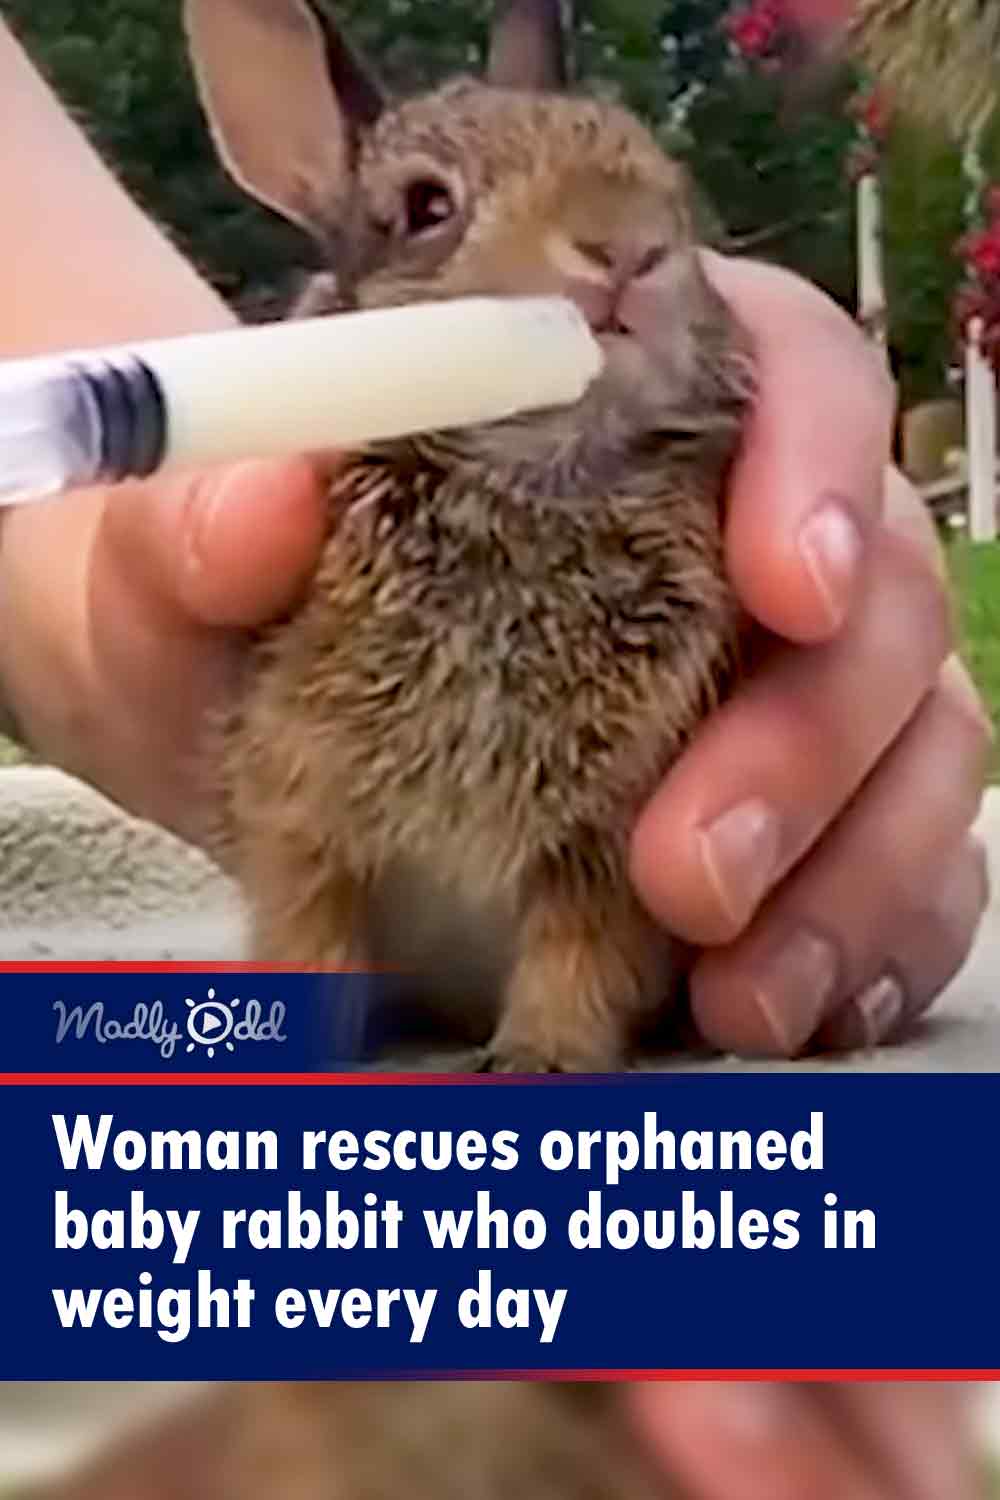 Woman rescues orphaned baby rabbit who doubles in weight every day